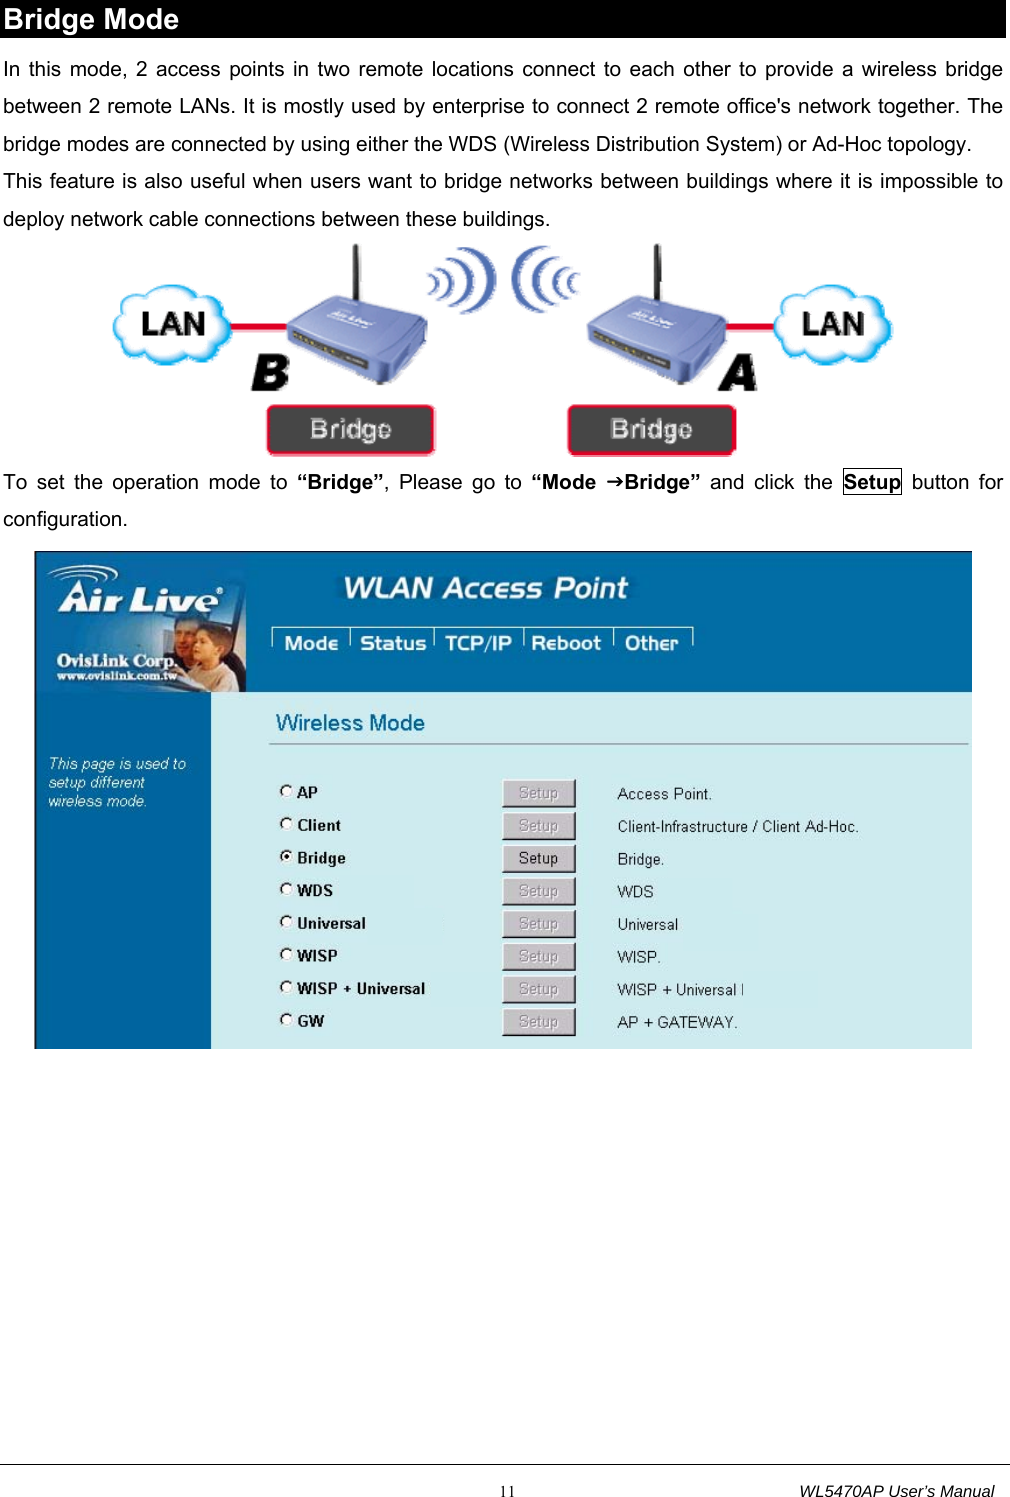                                                           11                                  WL5470AP User’s Manual Bridge Mode In this mode, 2 access points in two remote locations connect to each other to provide a wireless bridge between 2 remote LANs. It is mostly used by enterprise to connect 2 remote office&apos;s network together. The bridge modes are connected by using either the WDS (Wireless Distribution System) or Ad-Hoc topology. This feature is also useful when users want to bridge networks between buildings where it is impossible to deploy network cable connections between these buildings.  To set the operation mode to “Bridge”, Please go to “Mode  JBridge” and click the Setup button for configuration.   